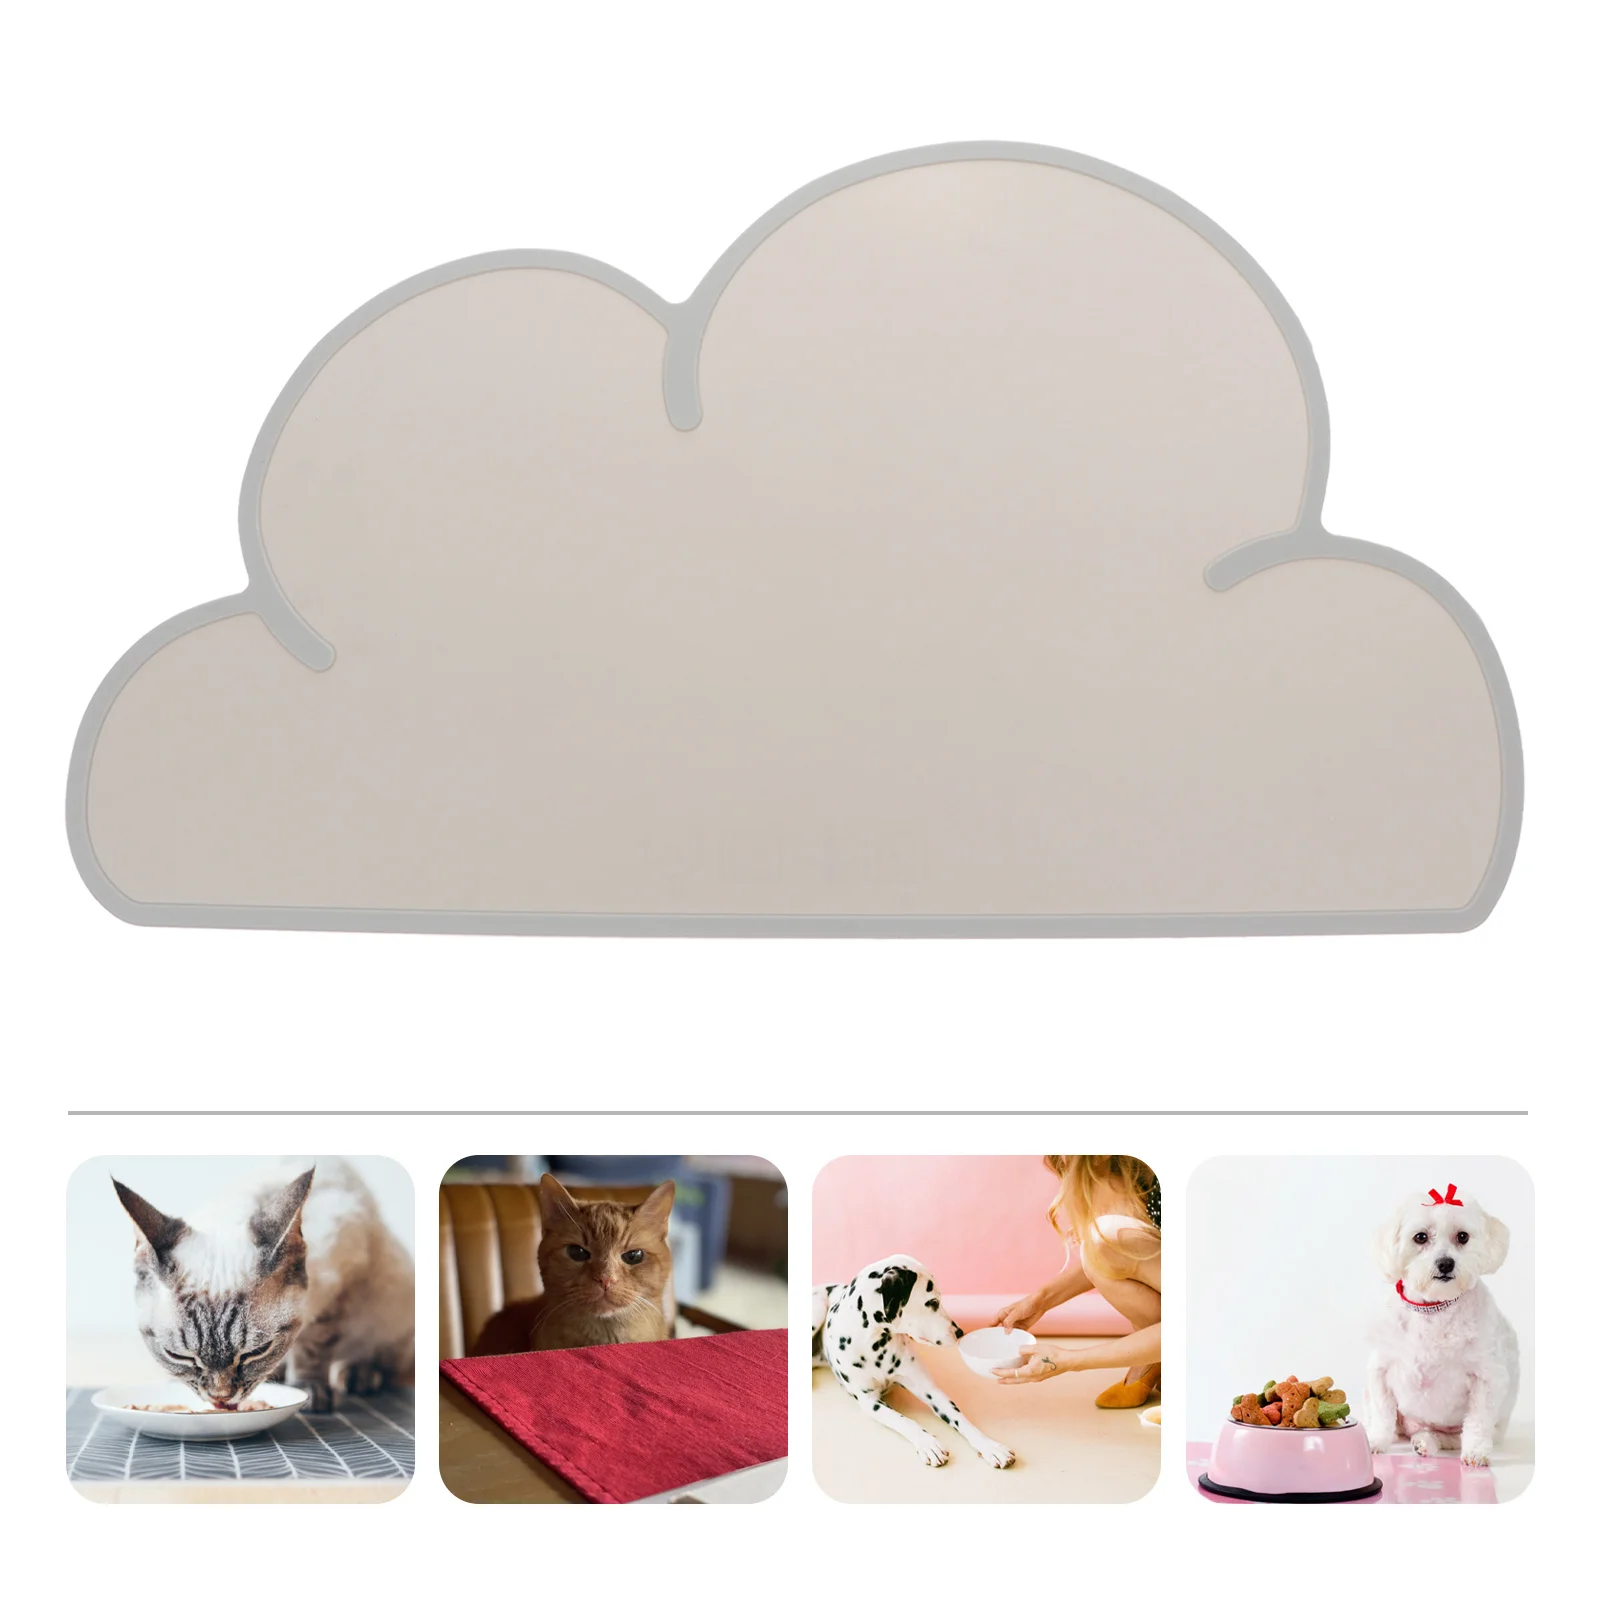 

Mat Dog Cat Placemat Bowl Pet Tray Silicone Feeding Pad Feeder Anti Water Table Trapping Litter Dinner Eating Dish Kitten